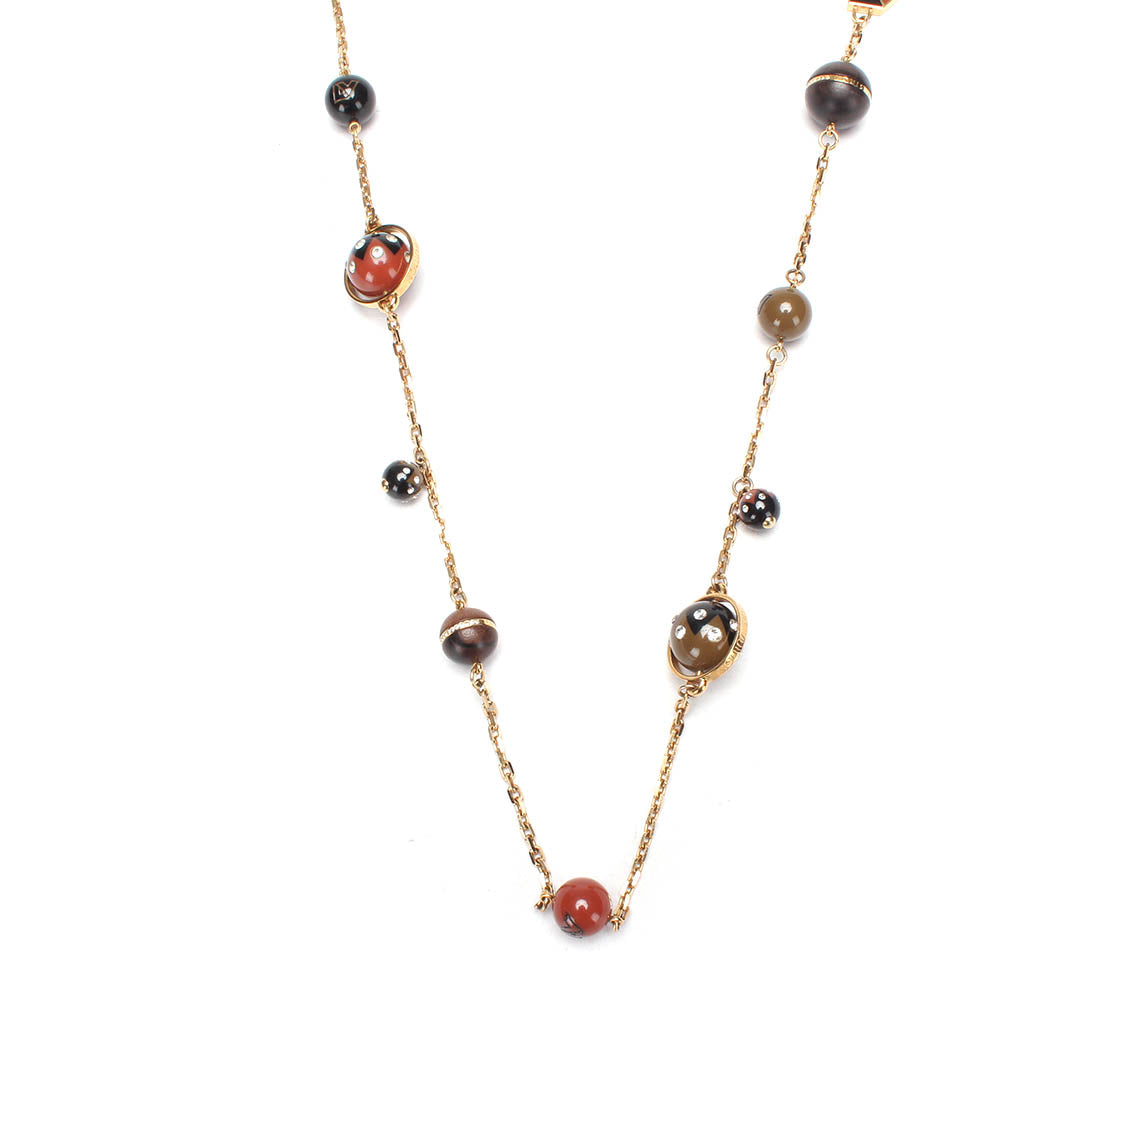 Louis Vuitton Crystal, Resin, & Wood LV Ball Charm Necklace Plastic Necklace in Bad condition